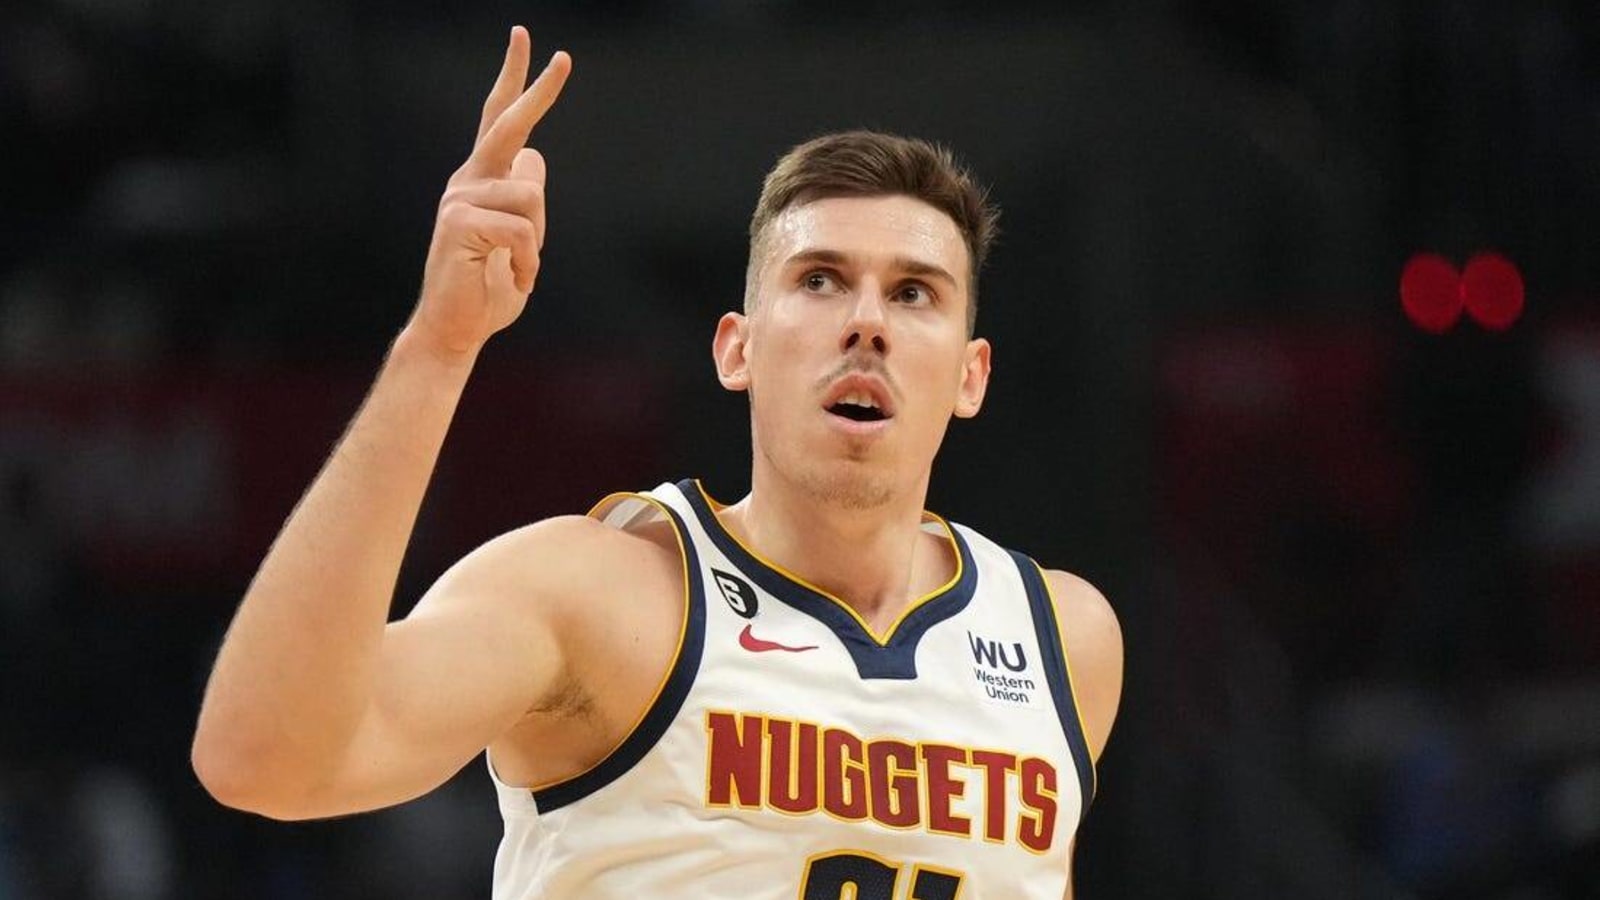 Denver Nuggets vs. Houston Rockets preview, odds: Vlatko Cancar eager to keep making impact